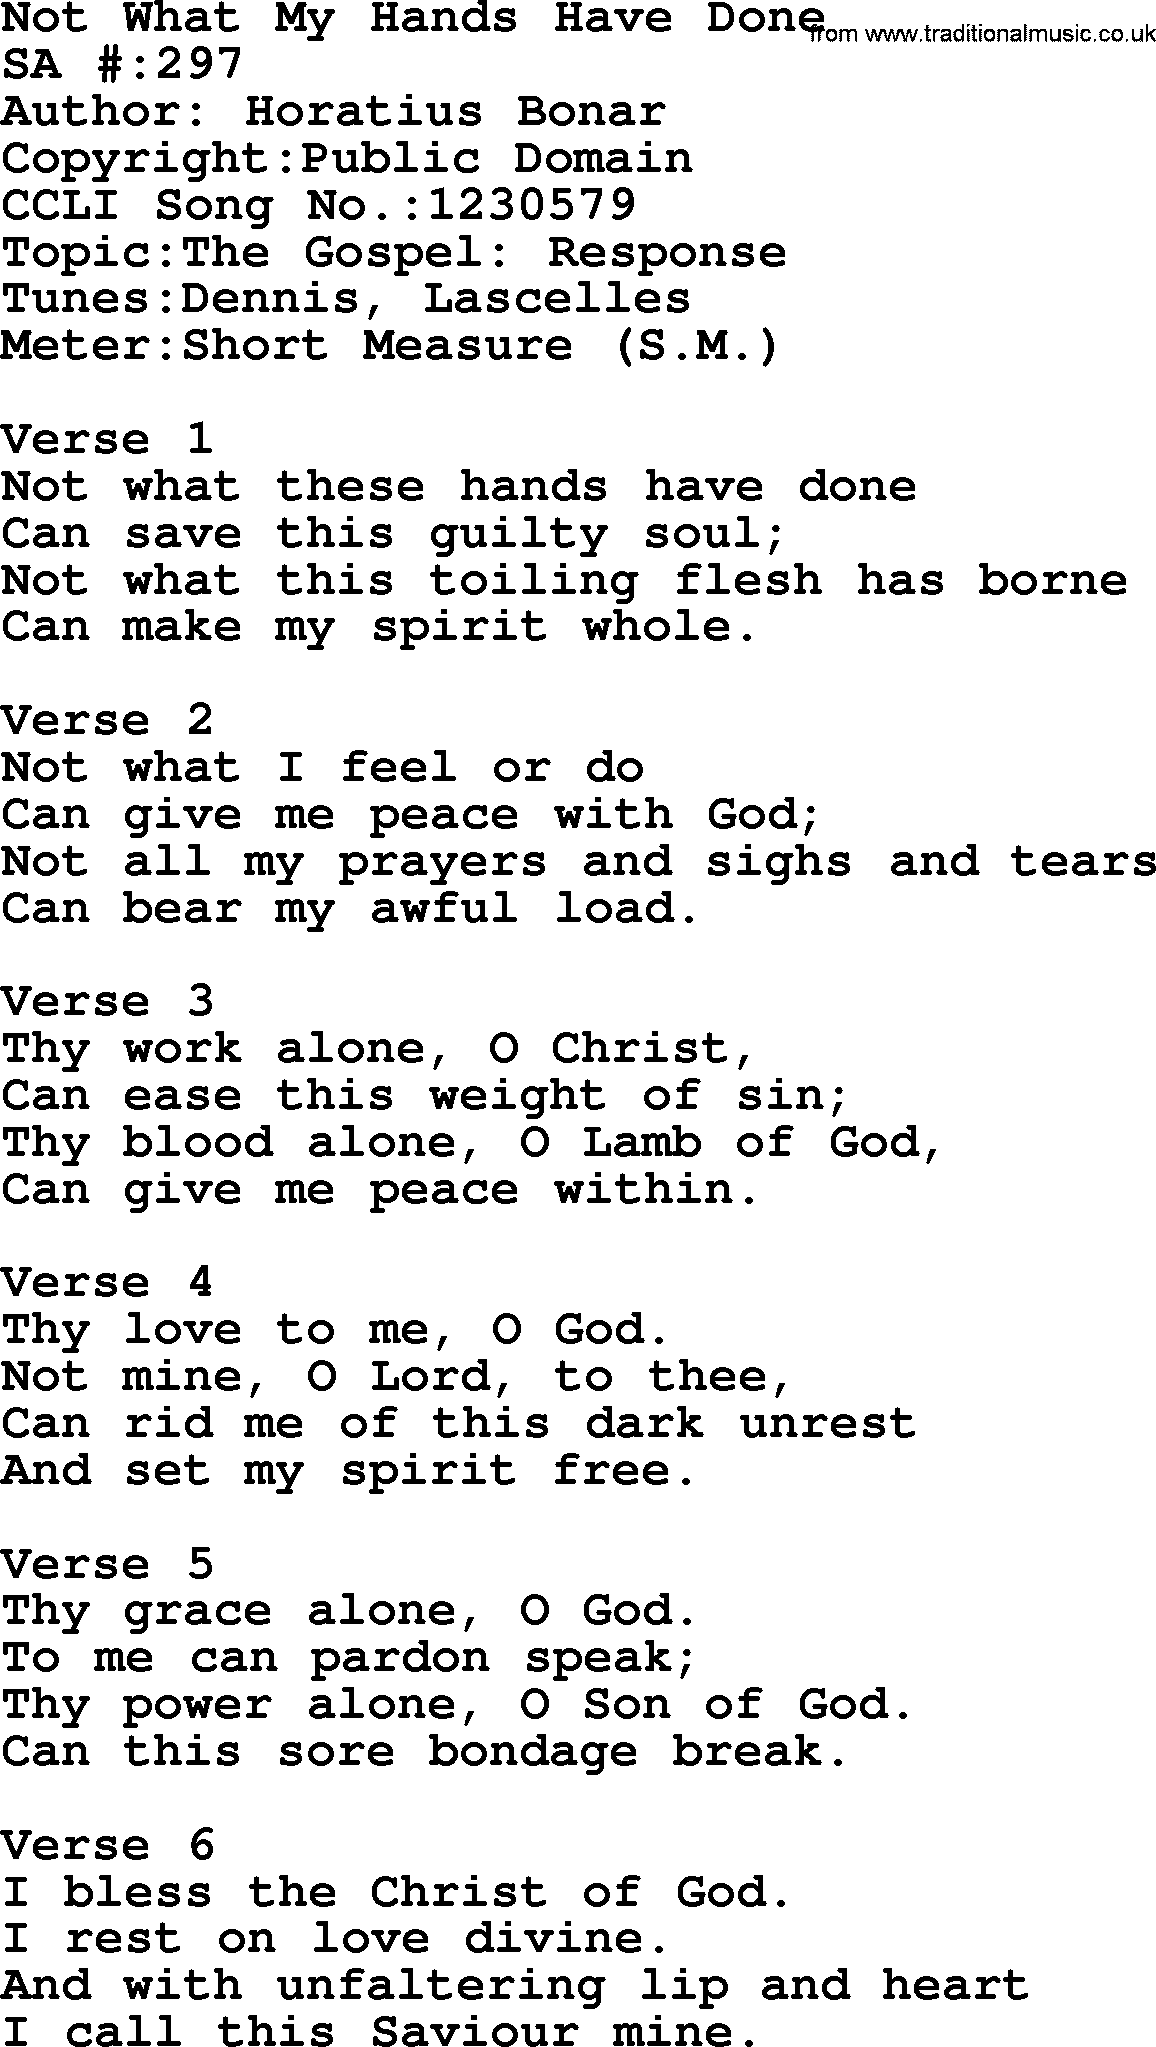 Salvation Army Hymnal, title: Not What My Hands Have Done, with lyrics and PDF,